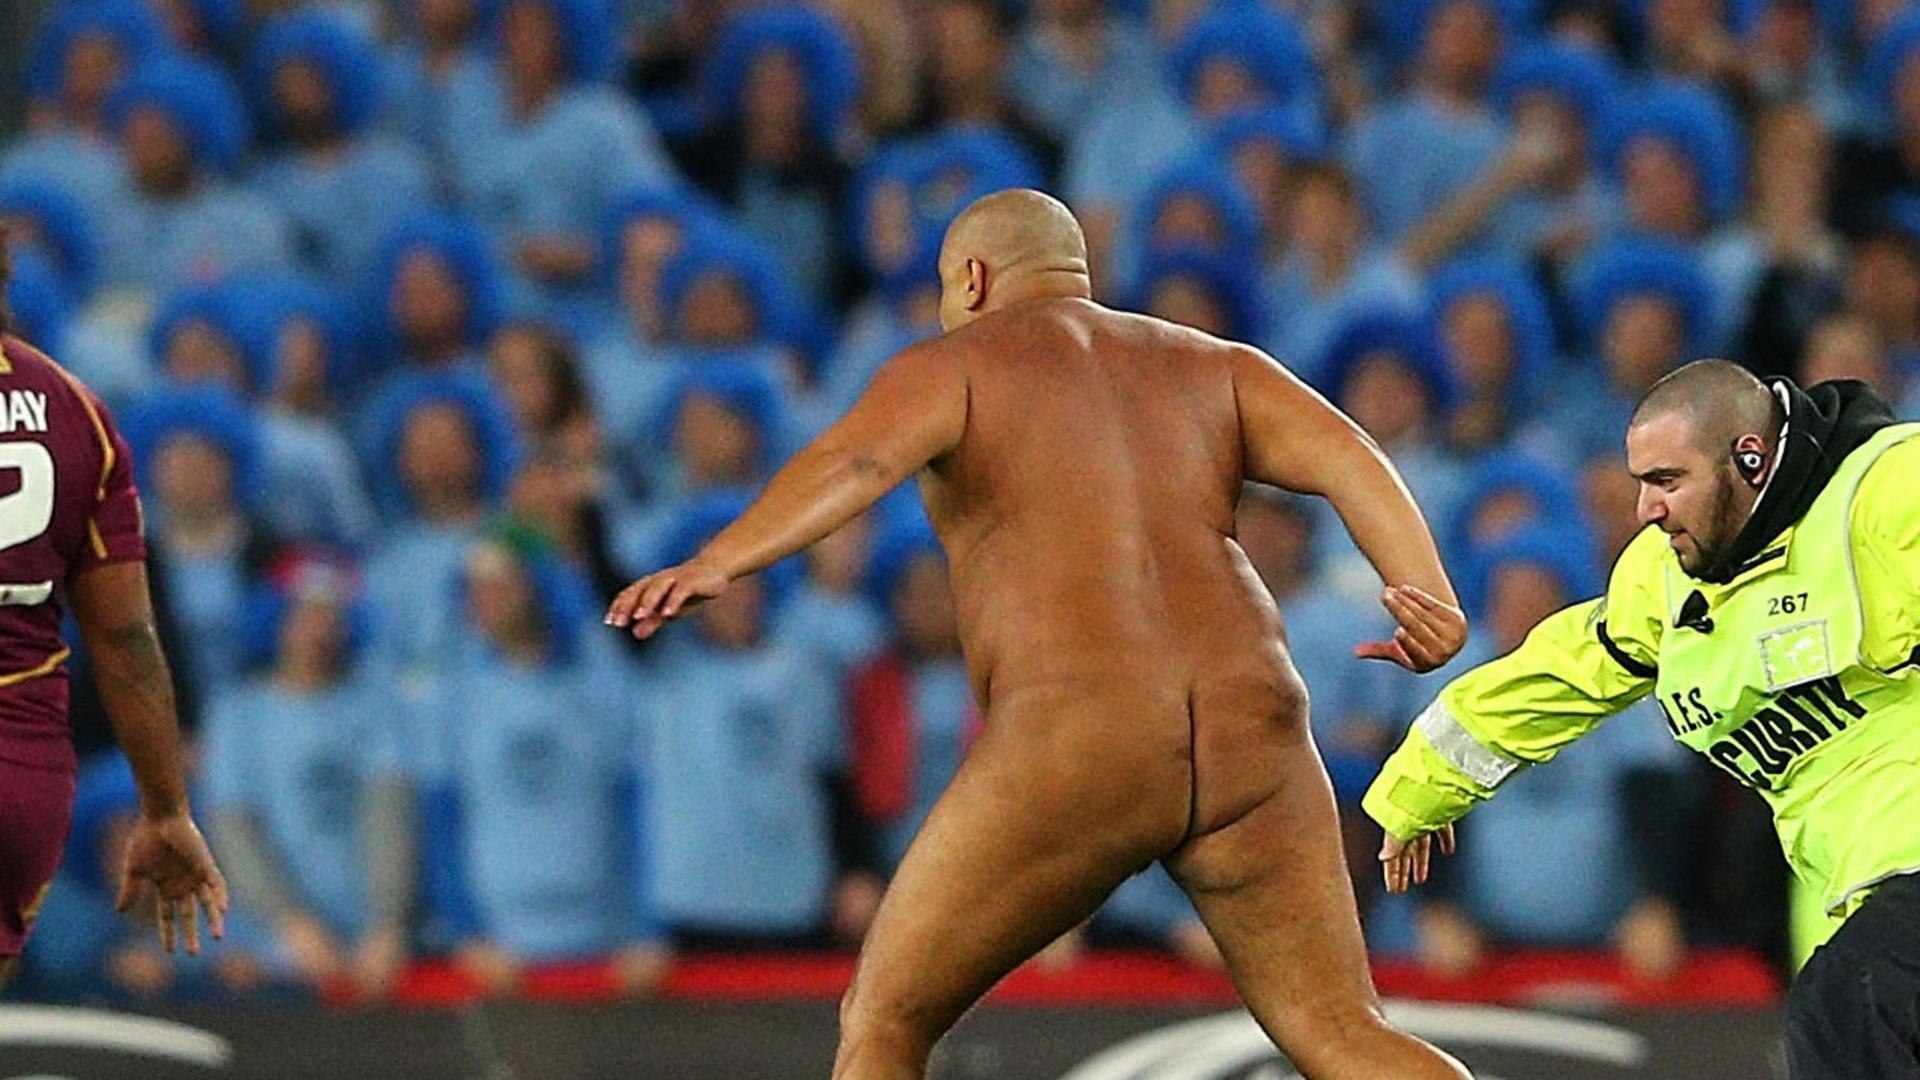 Top 5 Streaker Moments in Sports - video Dailymotion